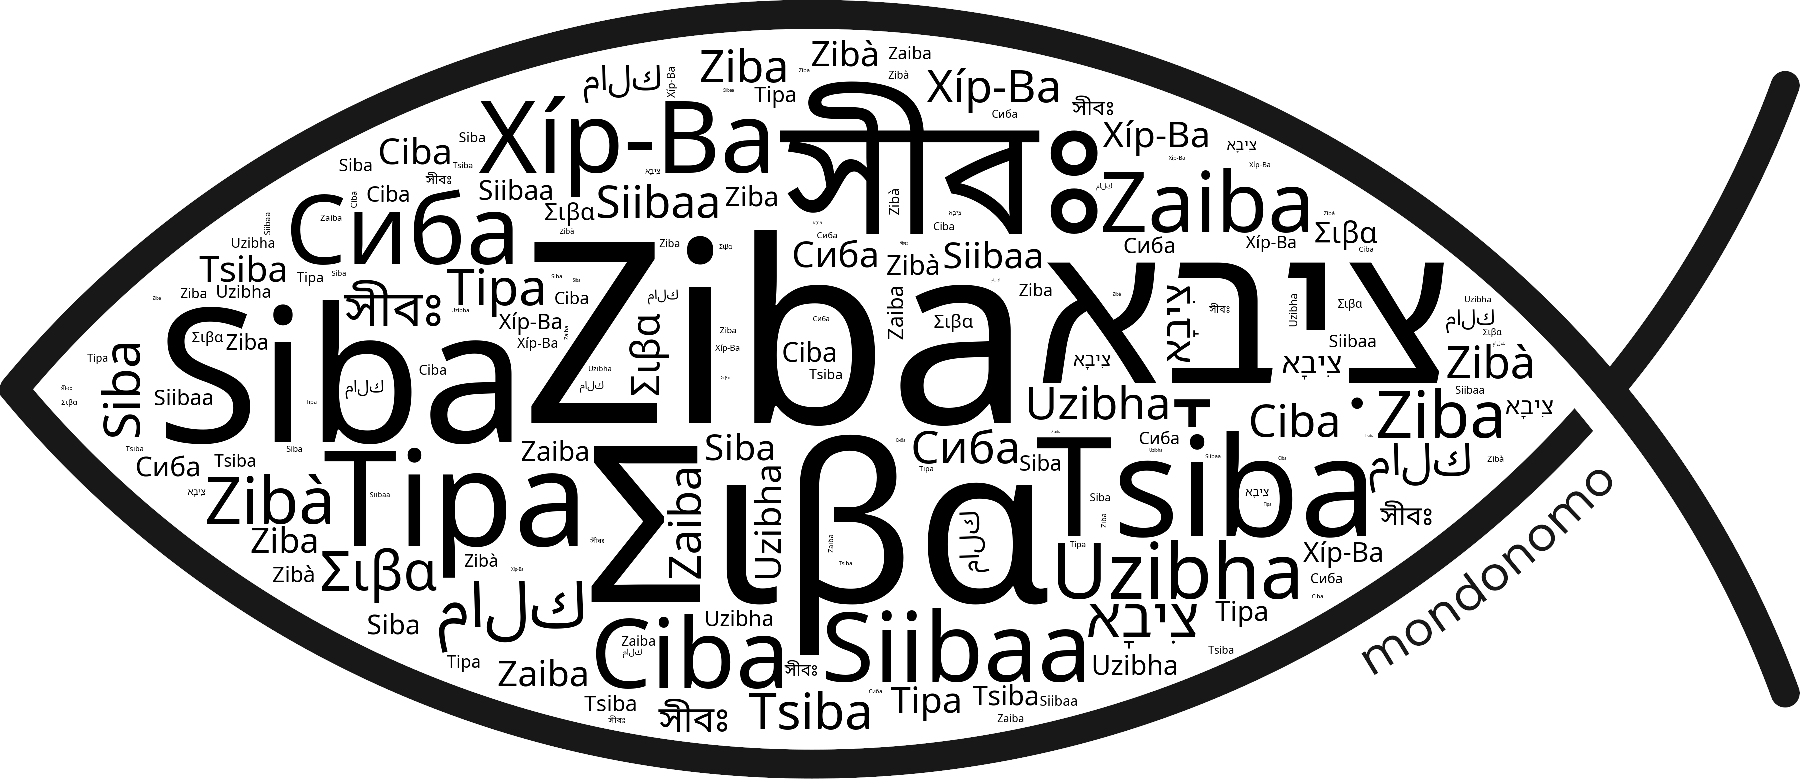 Name Ziba in the world's Bibles